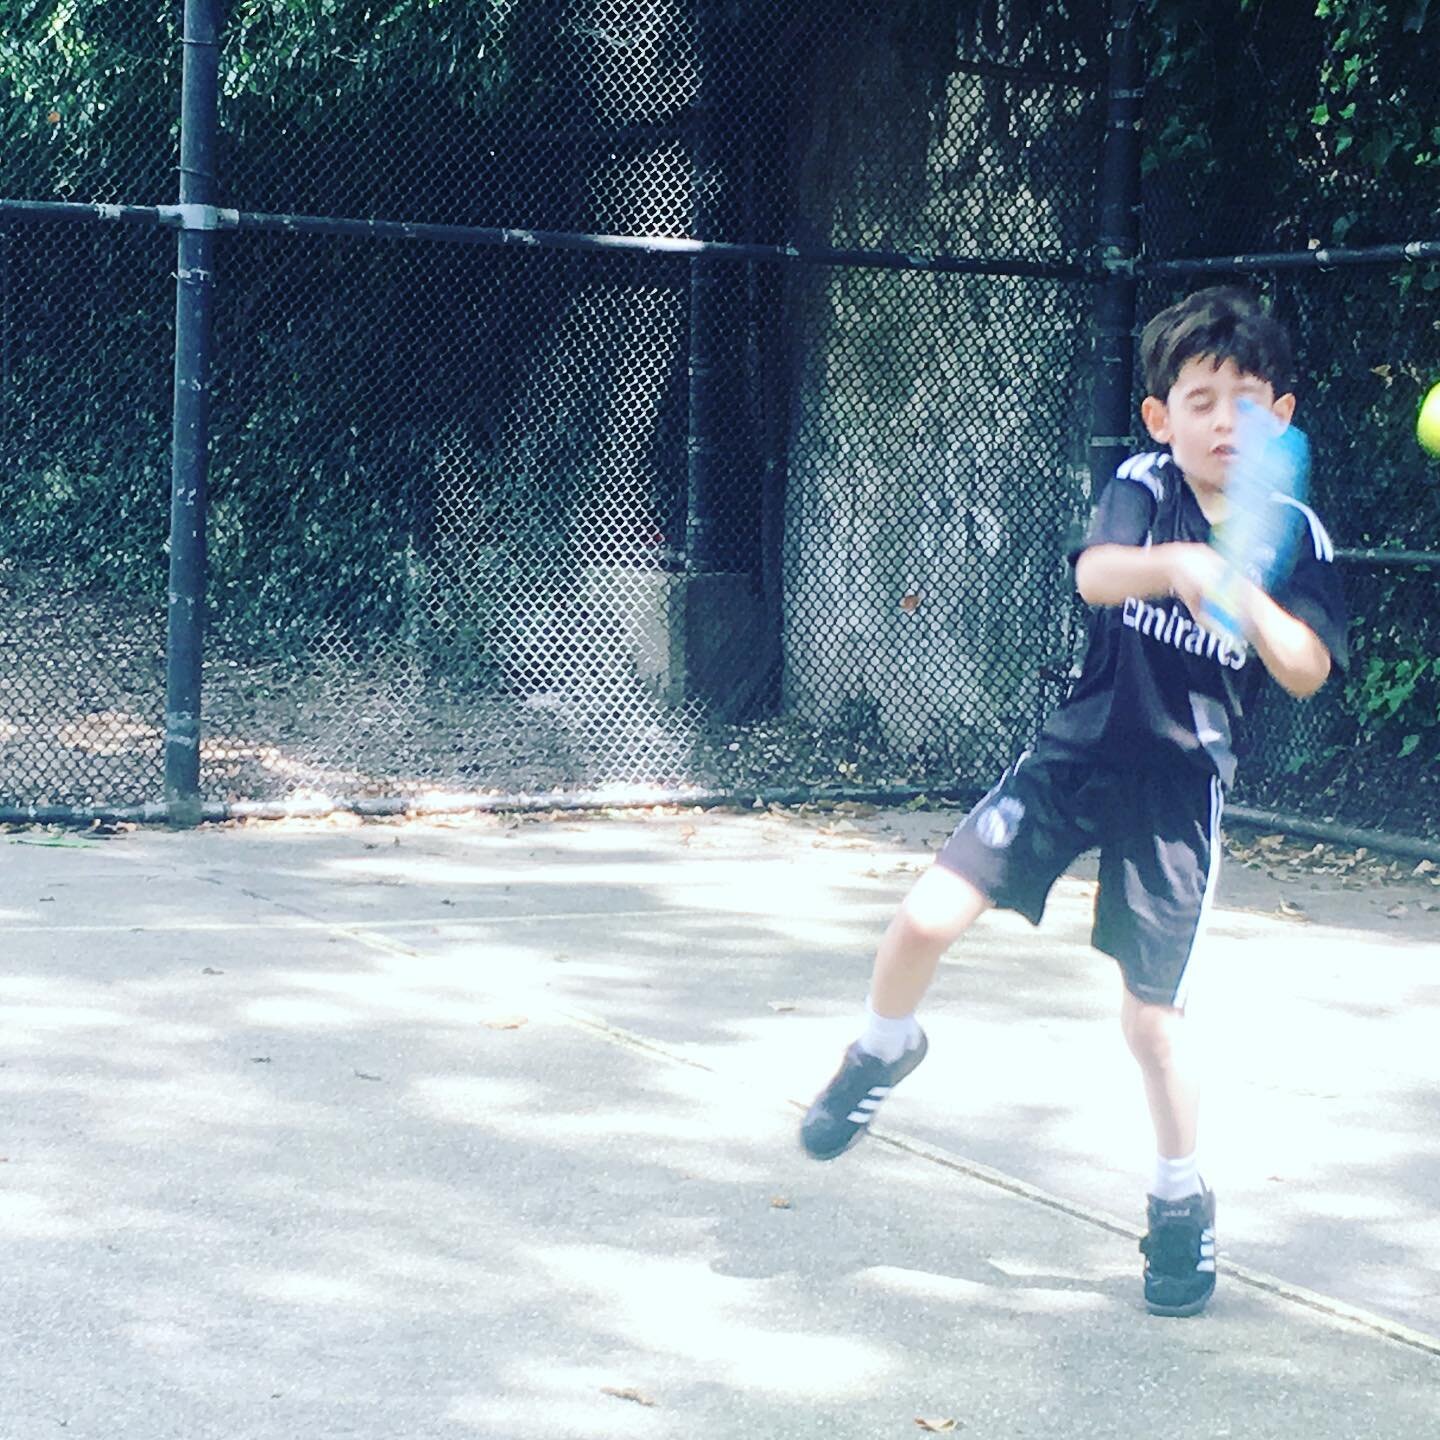 Early bird discounts available! Sign up before 2/28 with code EARLY. Go to www.brainiactennis.com/lessons #tennis #kidsactivties #activitiesforkids #activtiesfortoddlers #nyckidsclasses #uws #uwsnyc